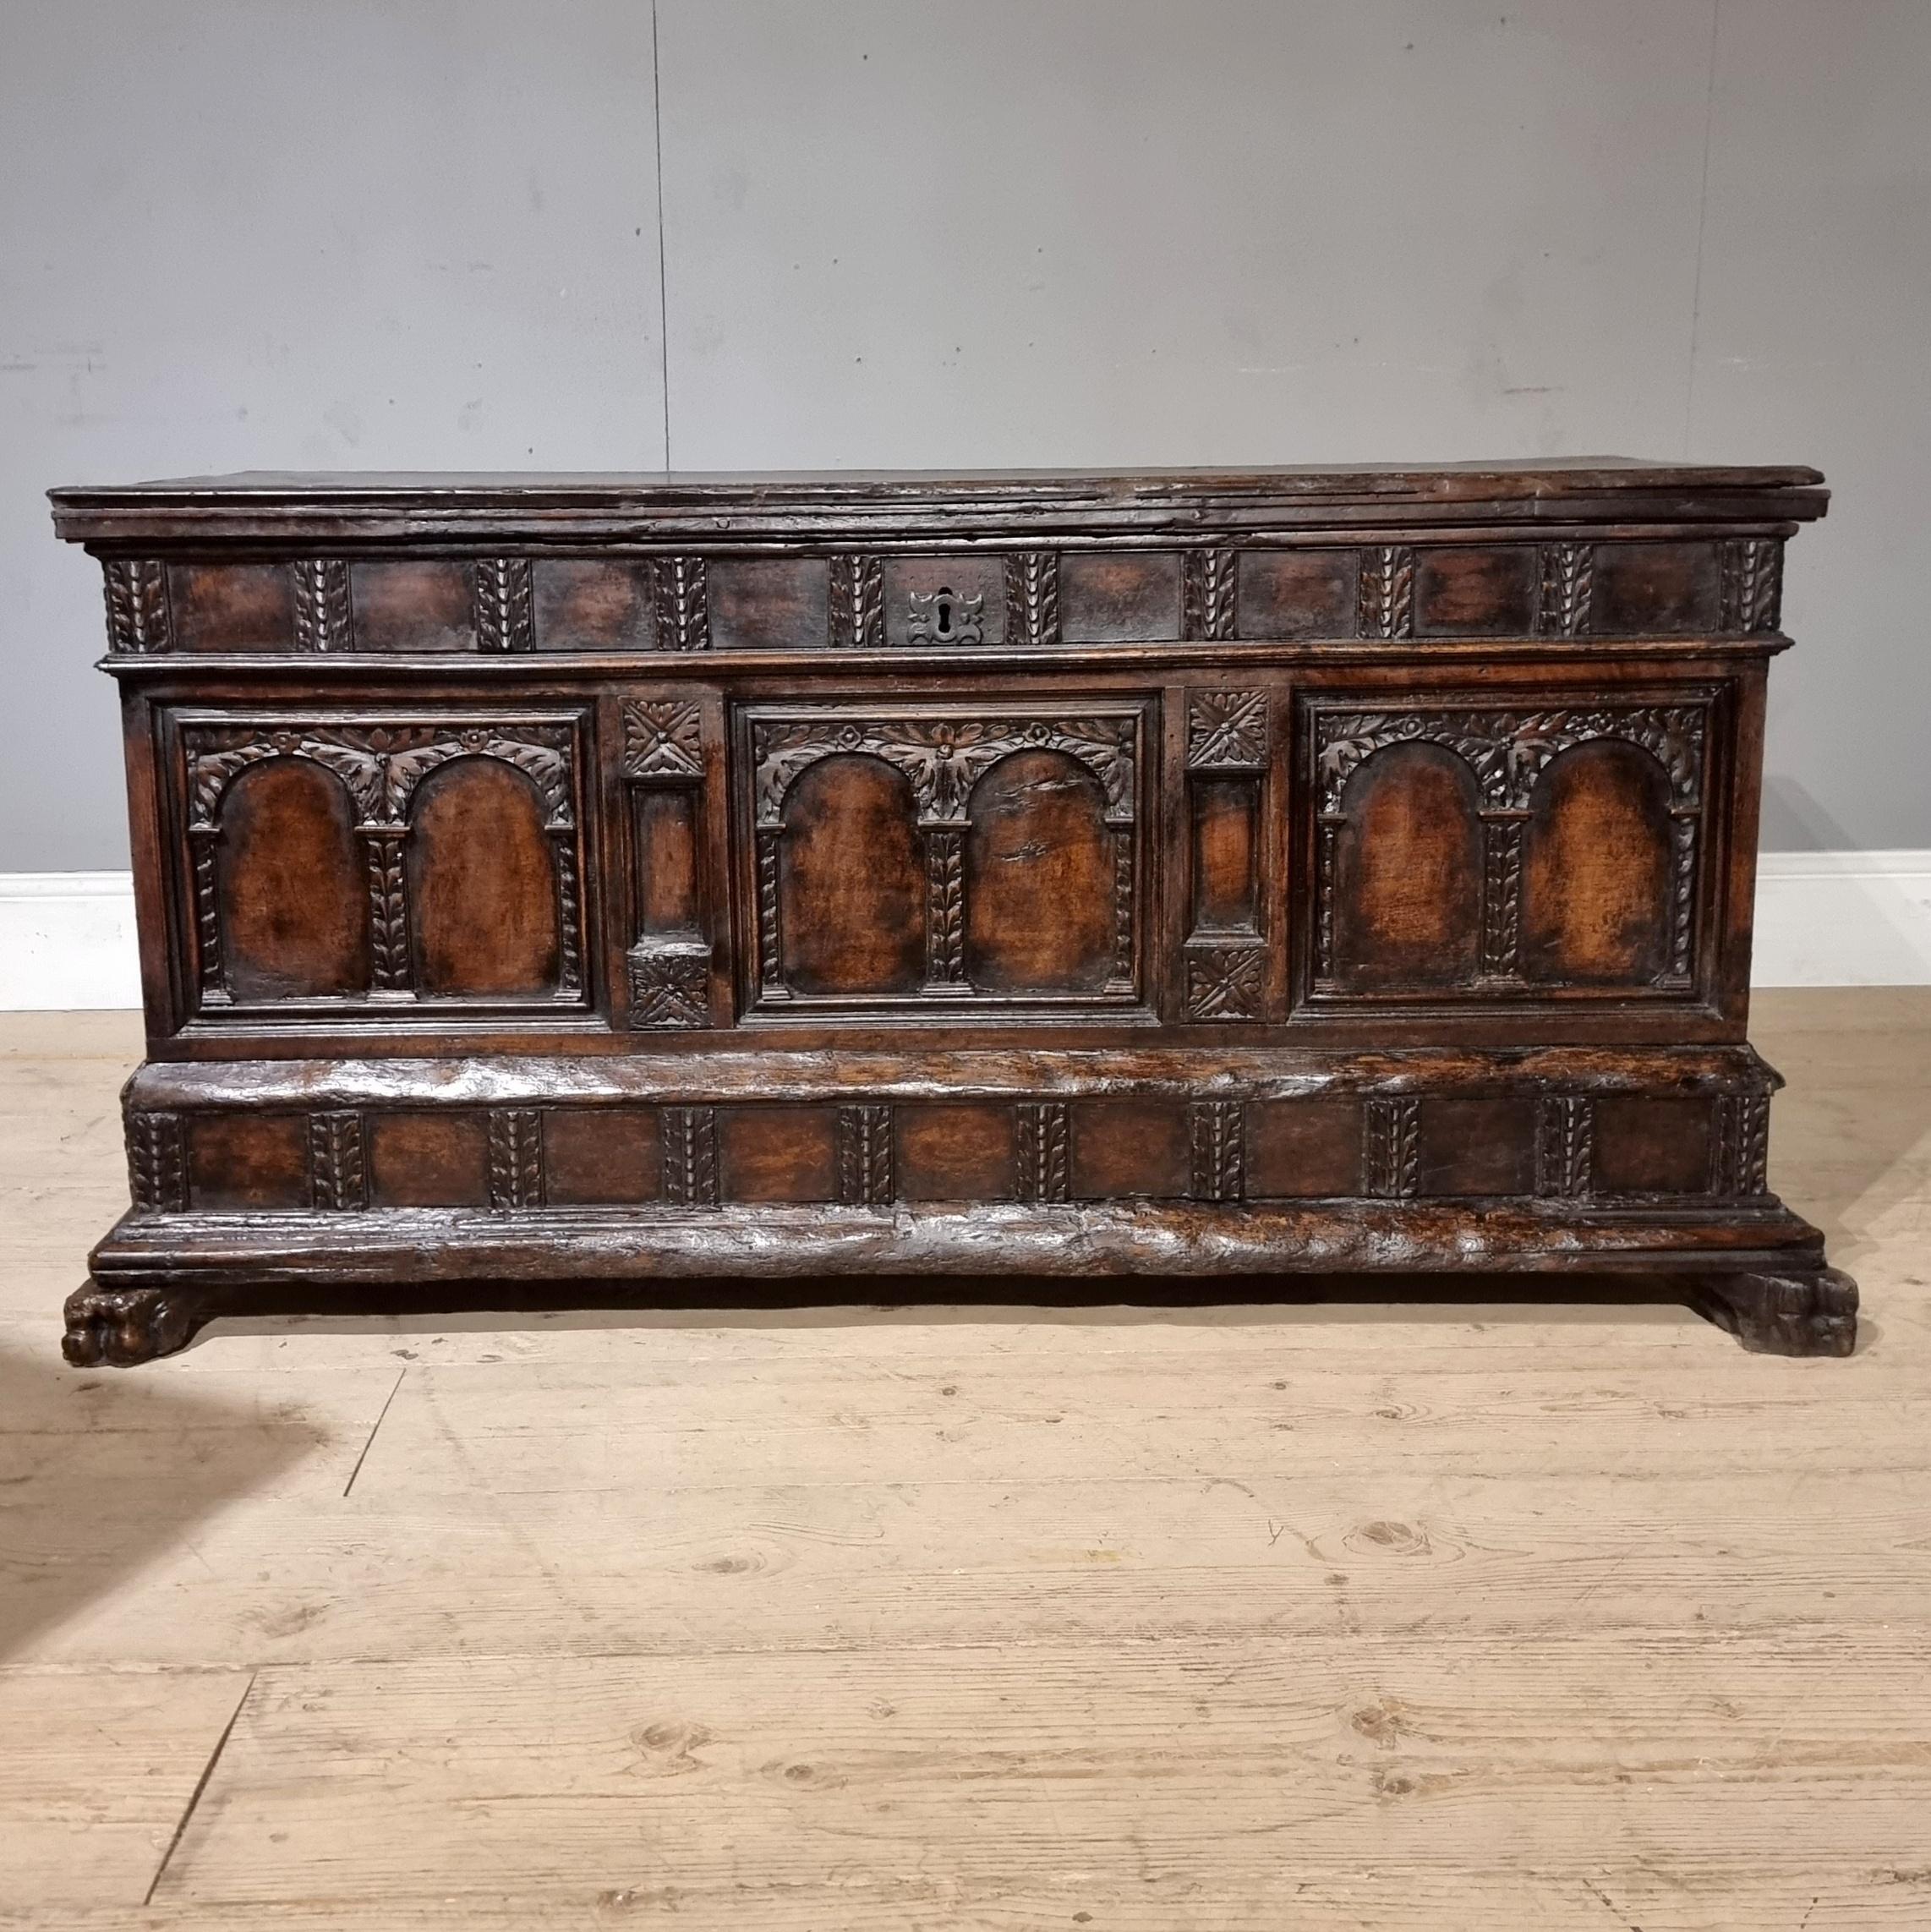 Late 17th C Italian carved walnut cassone coffer on paw feet with a wonderful inside carved panel. Beautiful rich colour and intricate hand carved details. 1690.

In very good condition, only showing signs of wear on lid and bottom rails as shown in